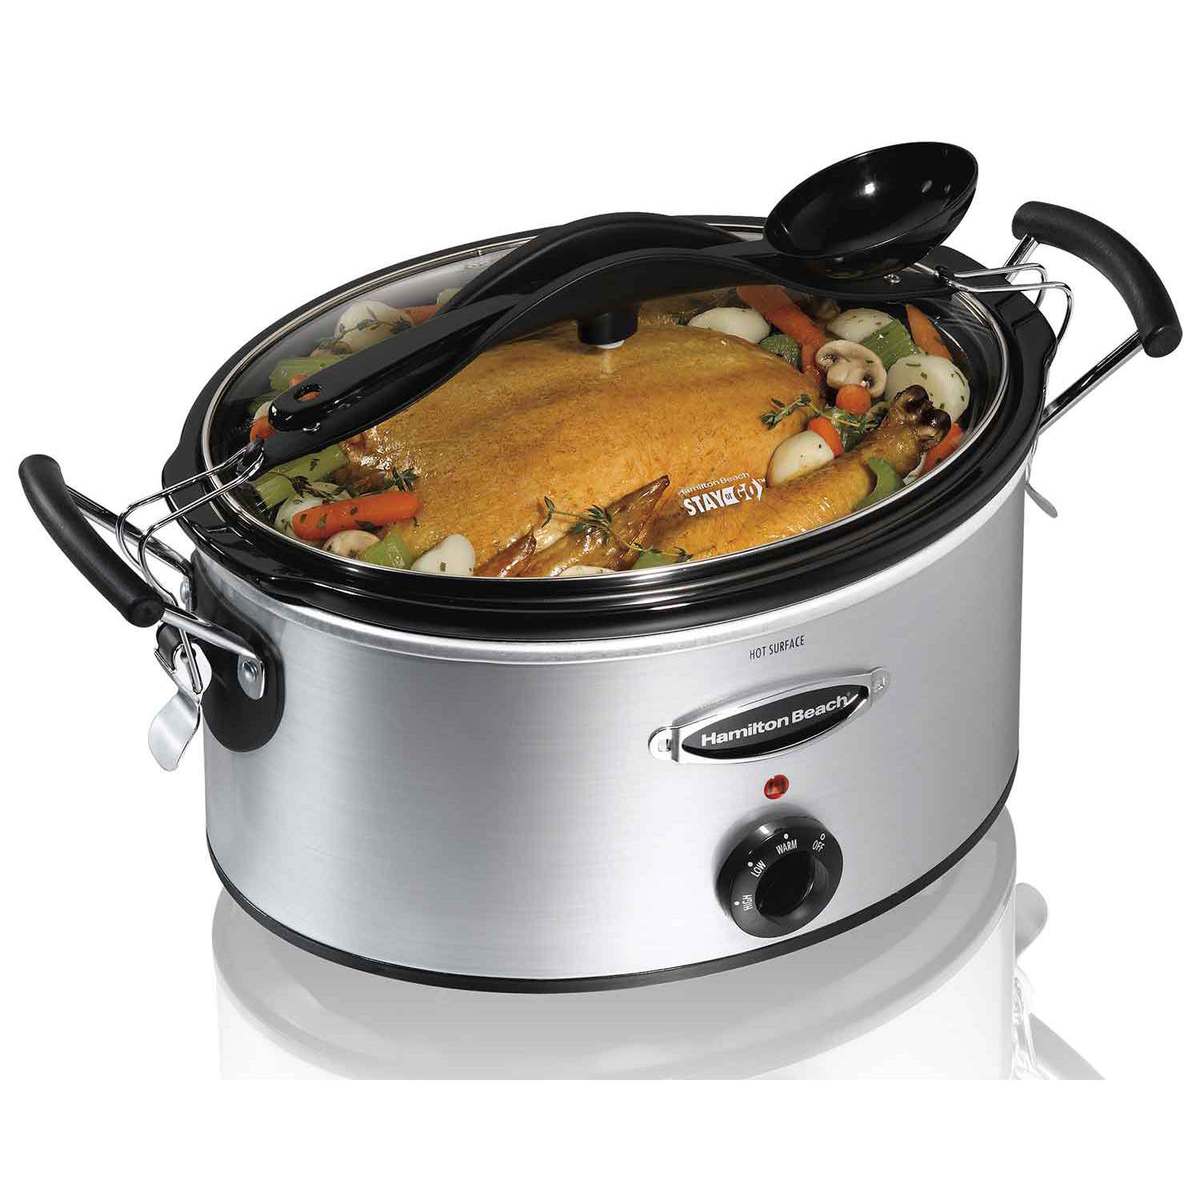 Stay or Go® 6 Quart Slow Cooker (33162RZ)